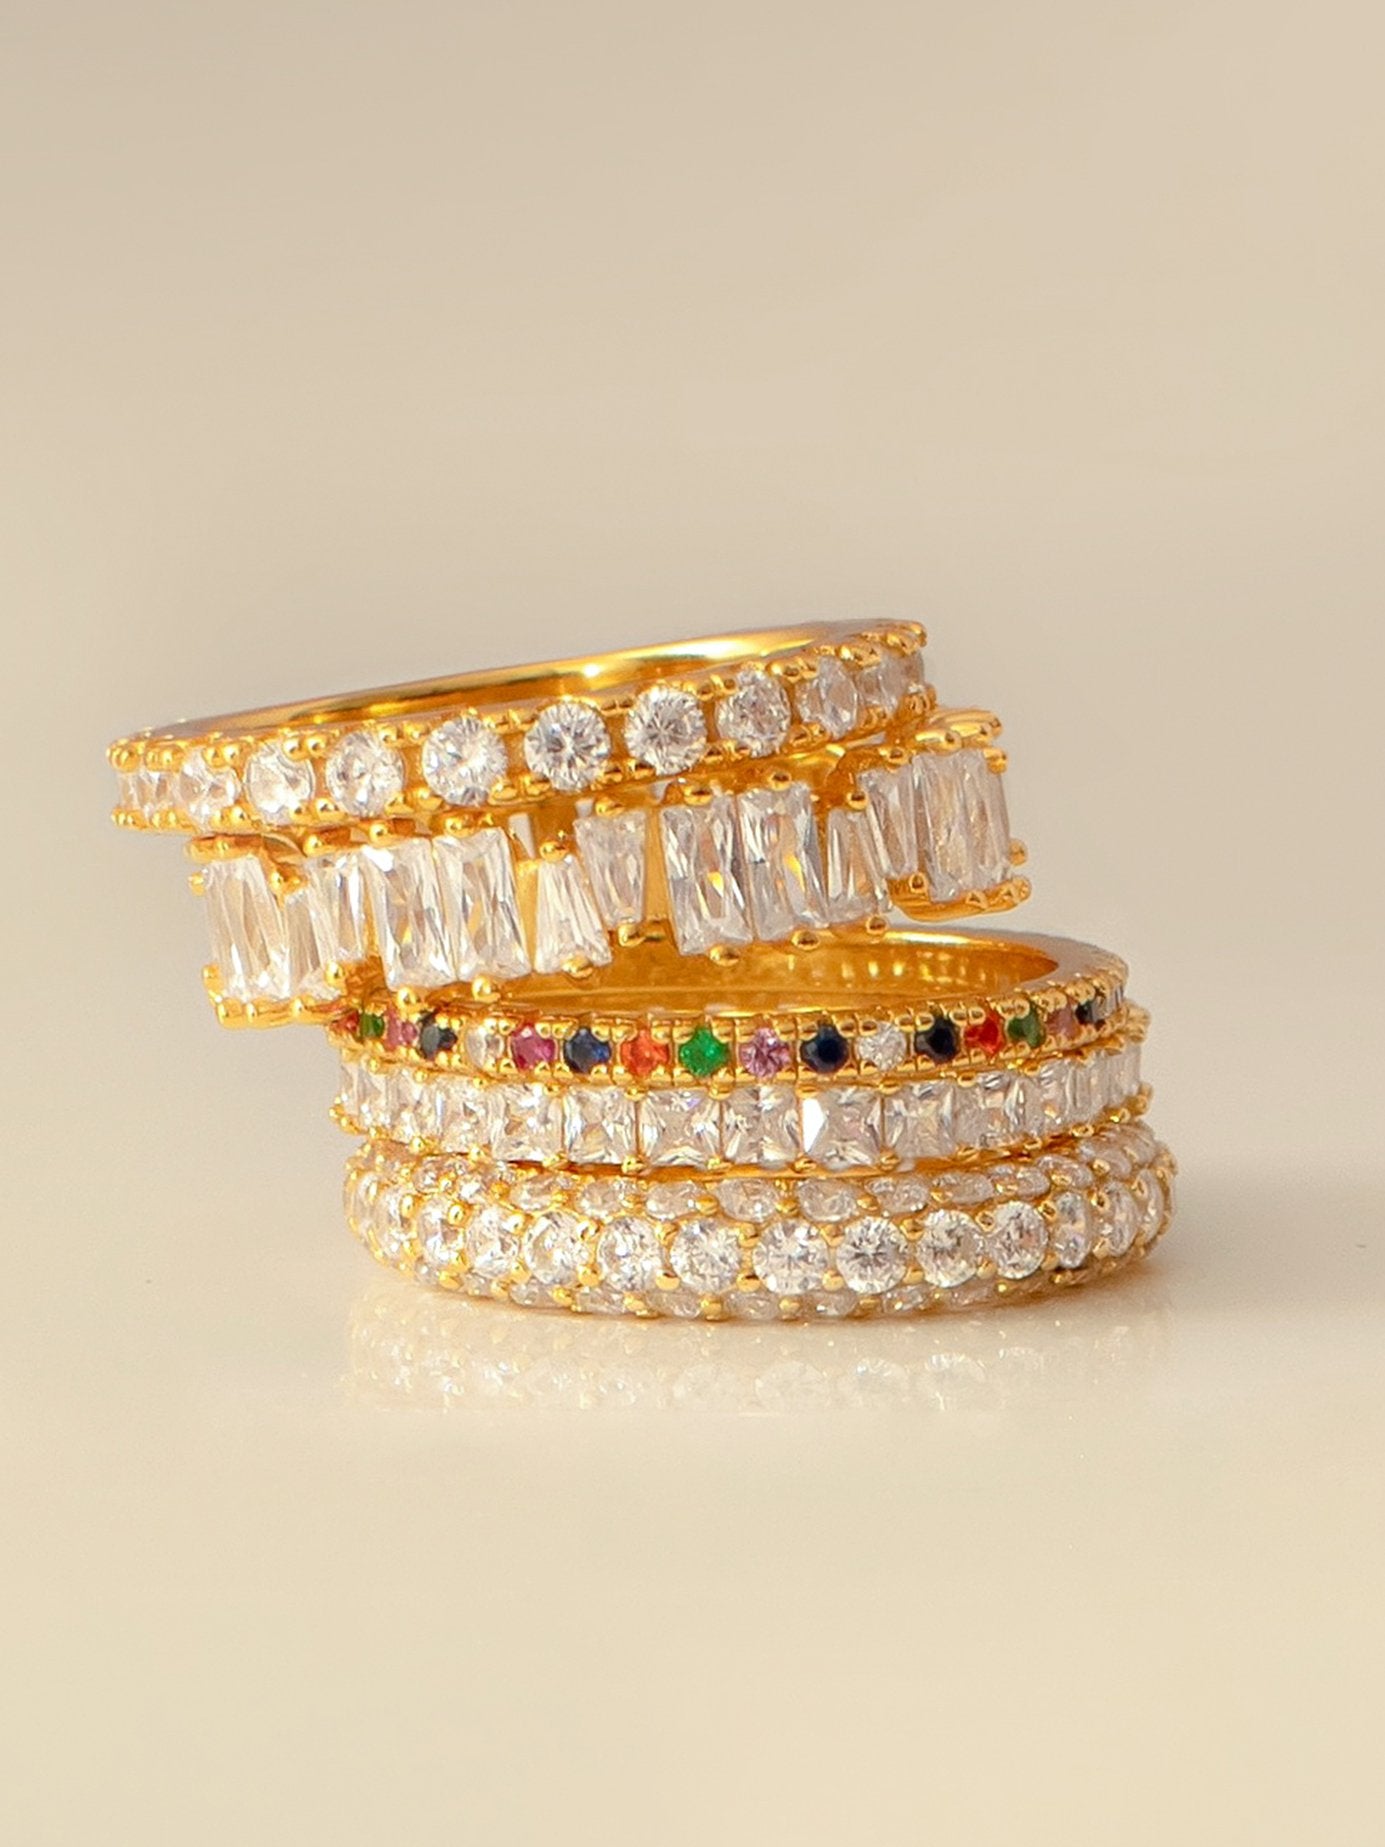 Gold stacking ring with baguette stones stacked with other gold eternity rings for women.